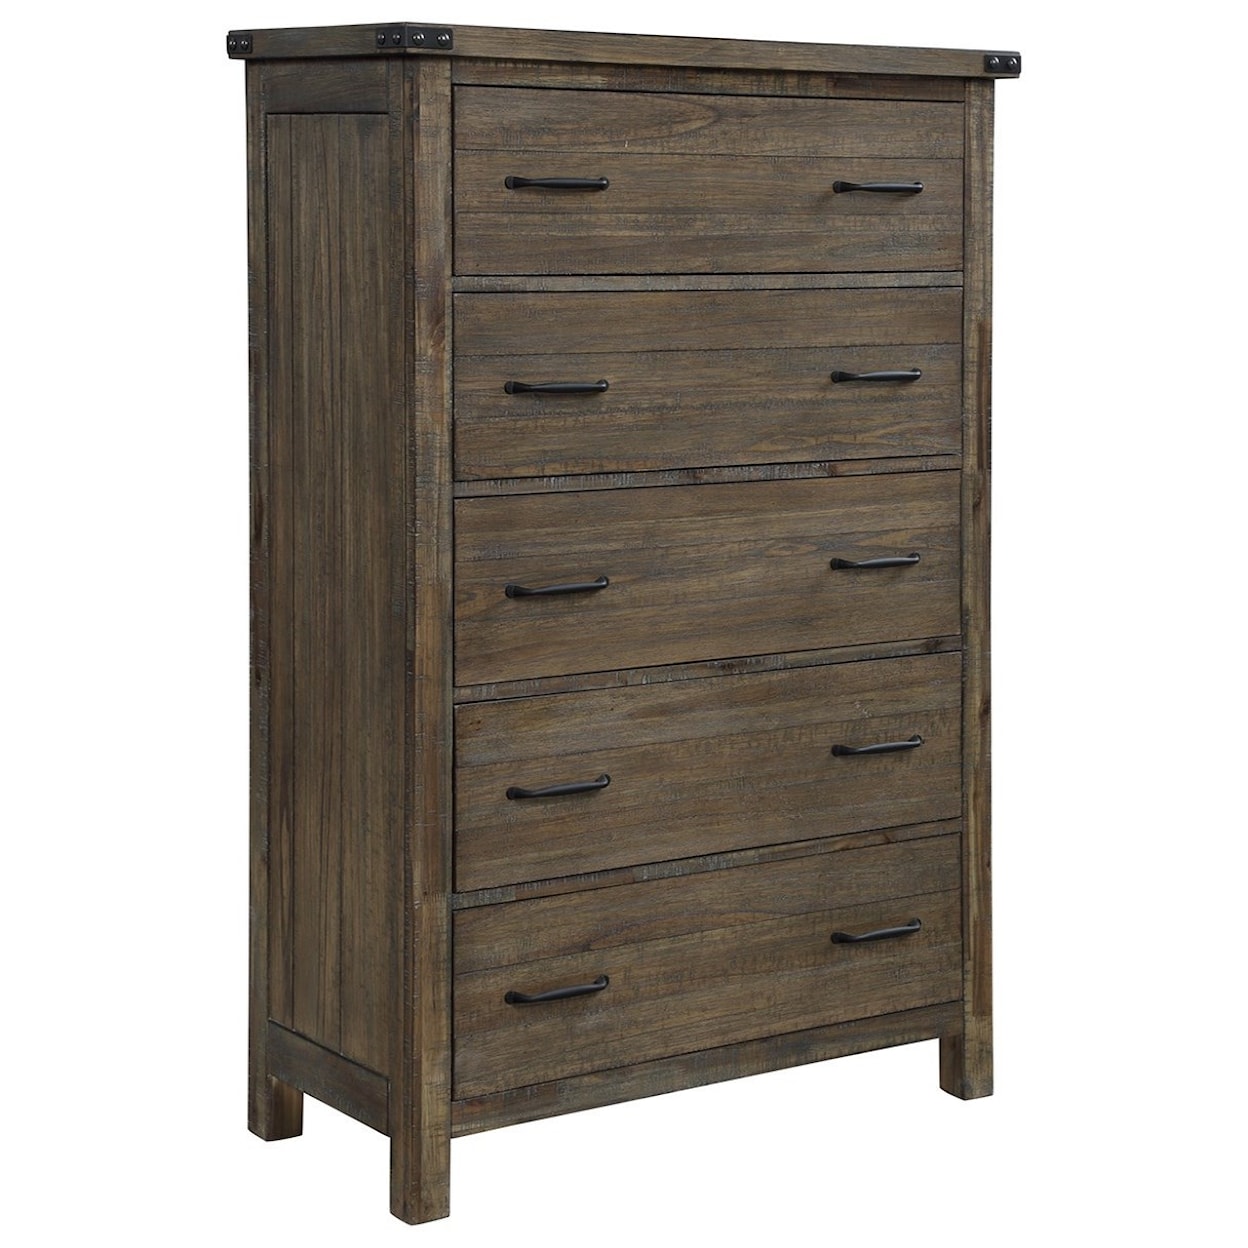 New Classic Galleon Chest of Drawers